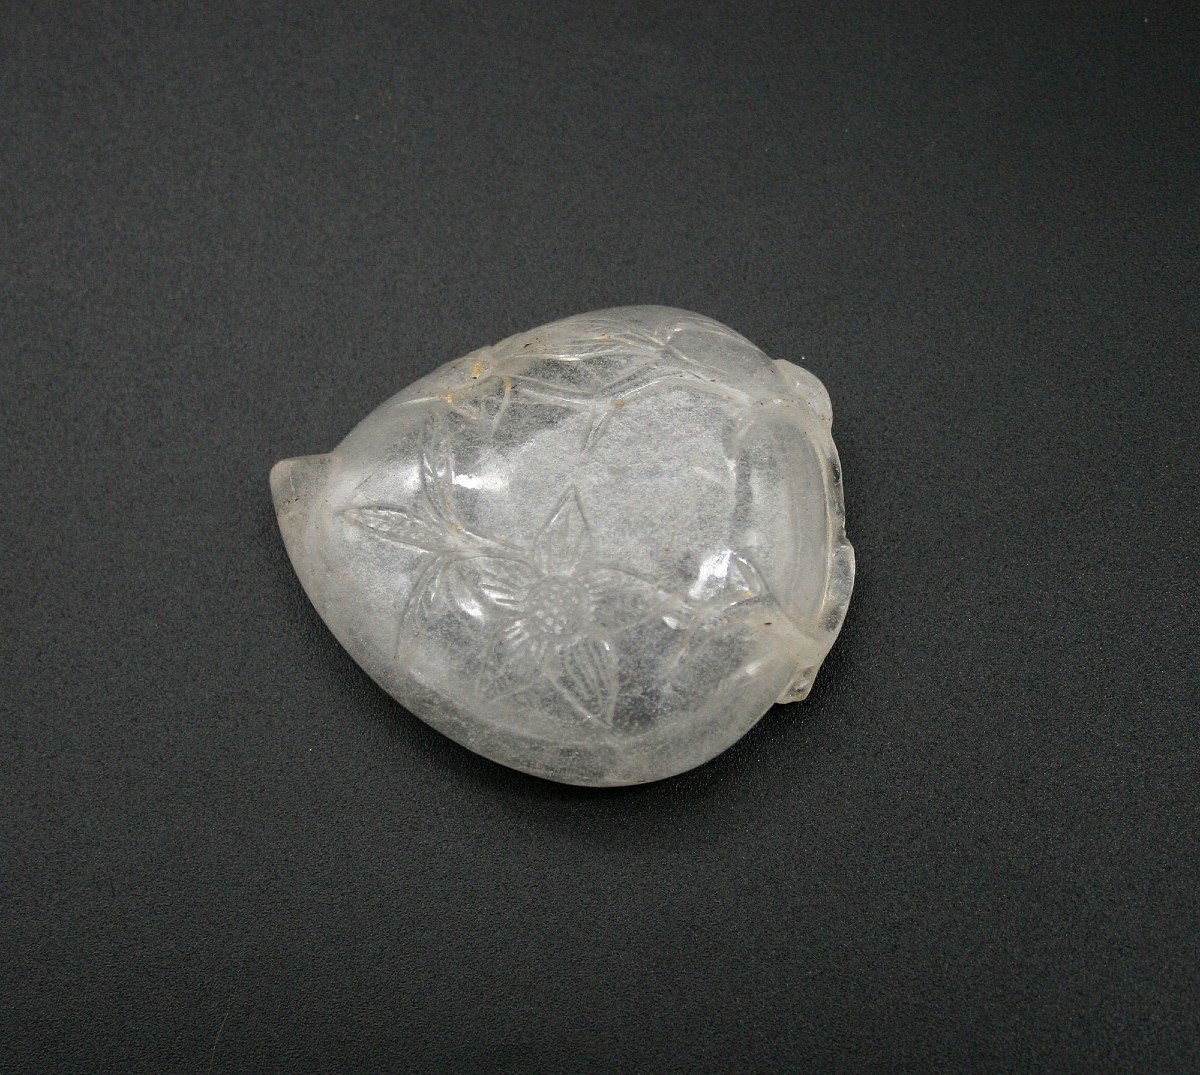 Antique Chinese Rock Crystal Brush Washer - Peach Shaped.-photo-3